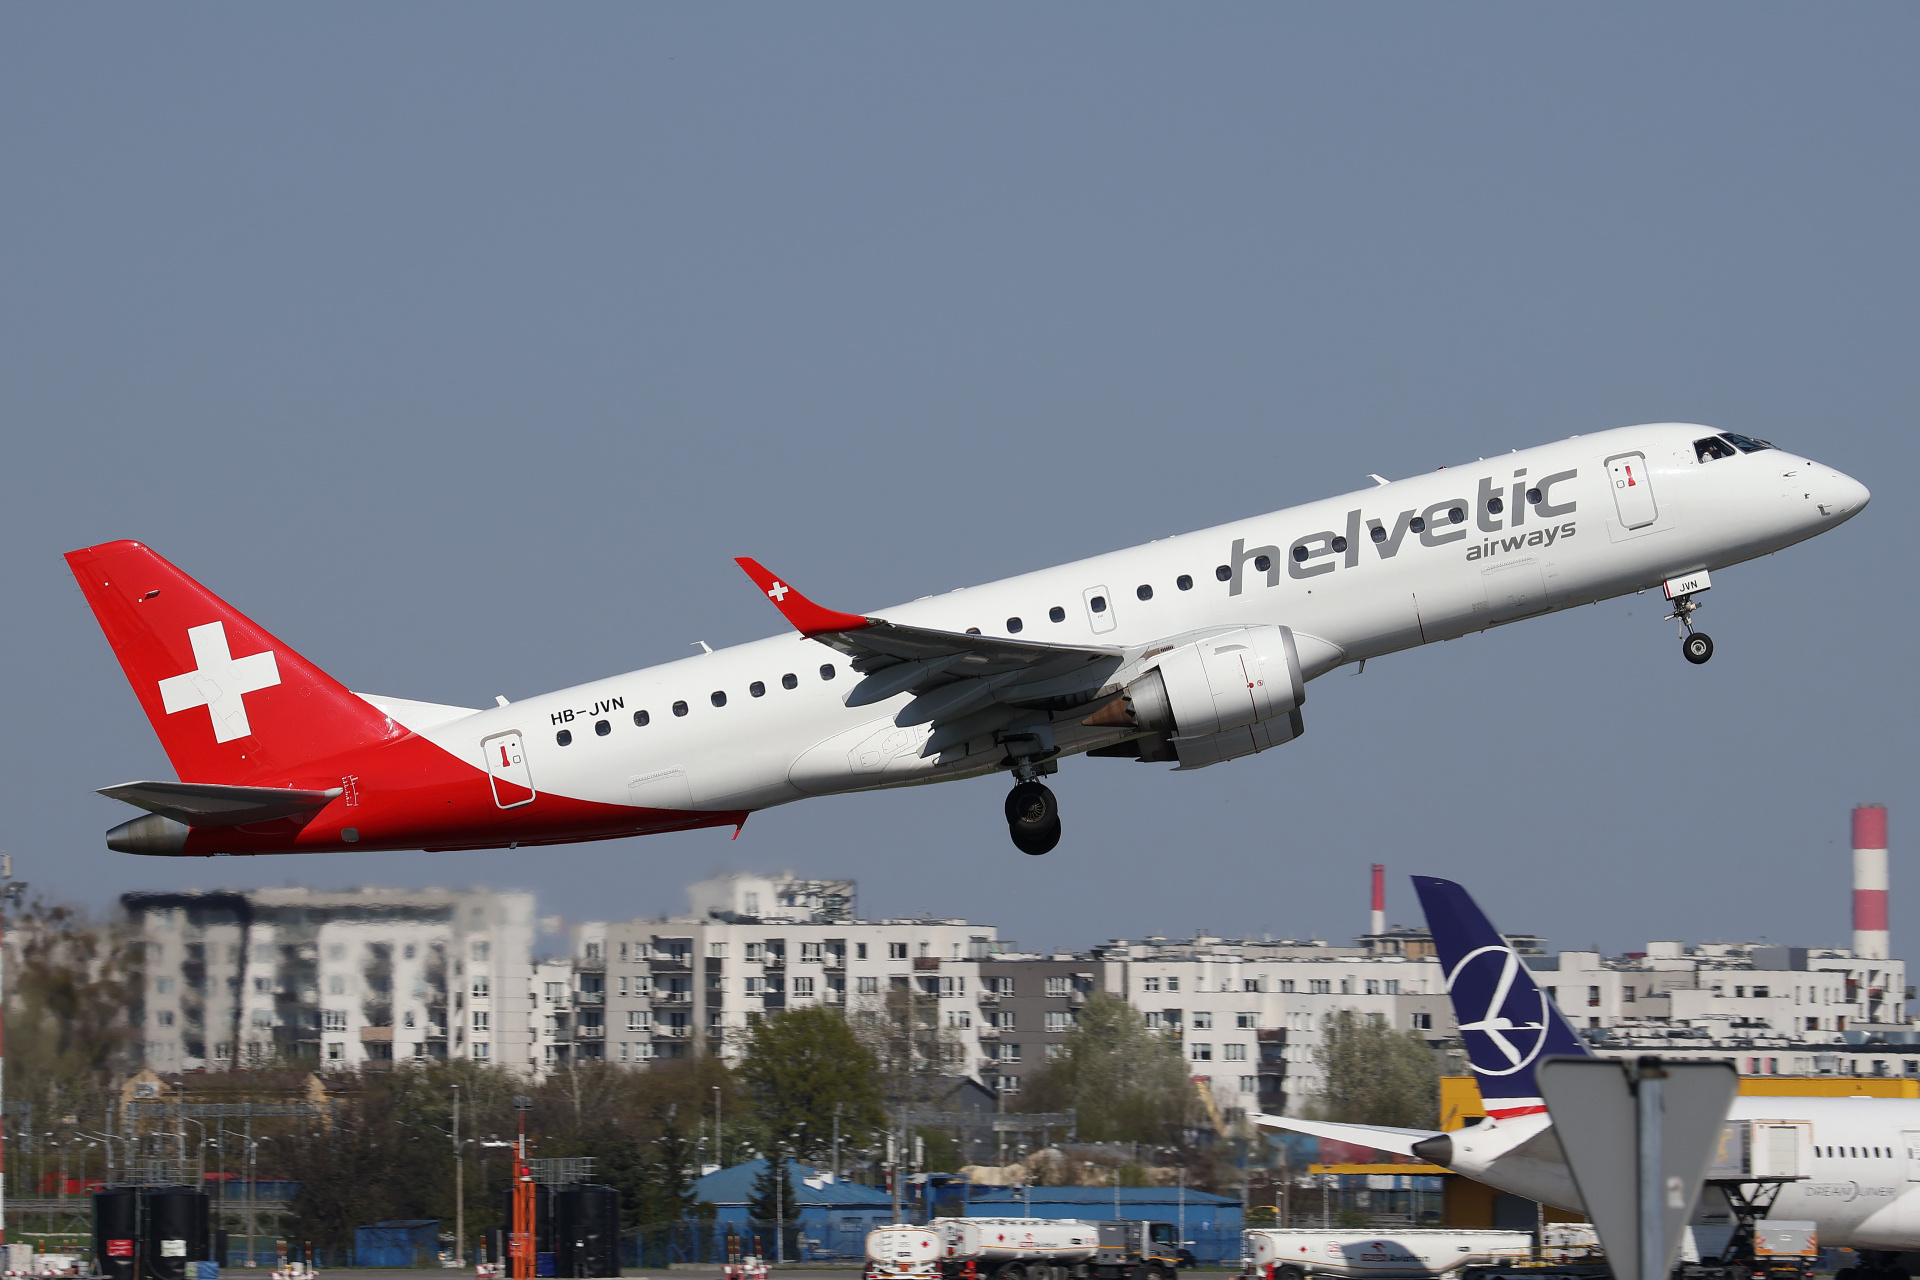 HB-JVN (Aircraft » EPWA Spotting » Embraer E190 » Helvetic Airways)